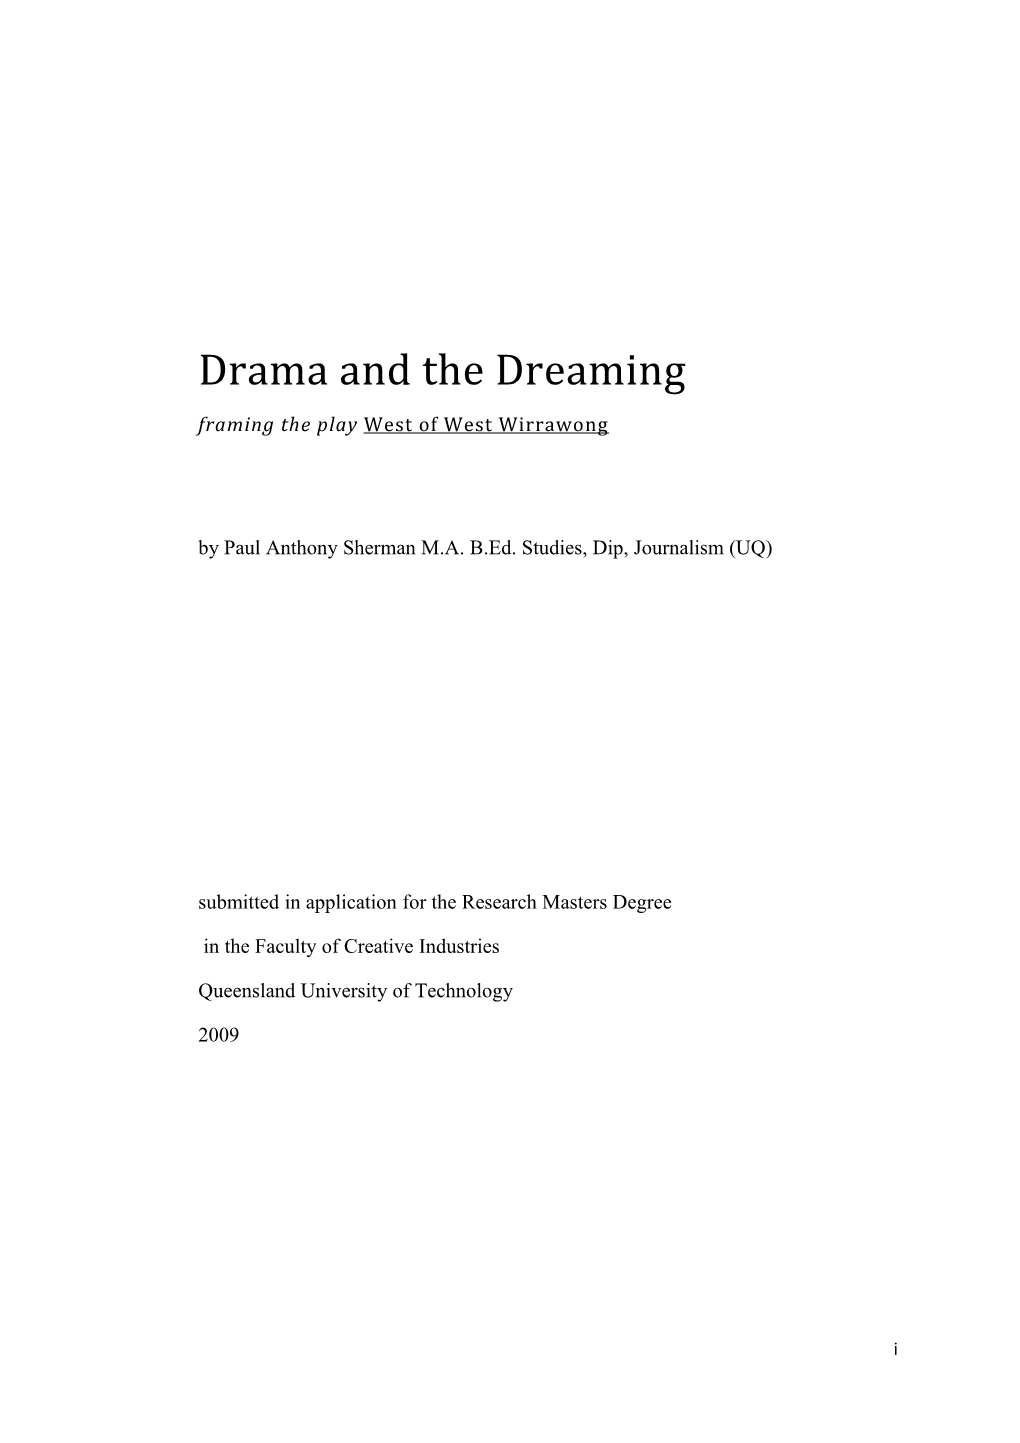 Drama and the Dreaming Framing the Play West of West Wirrawong